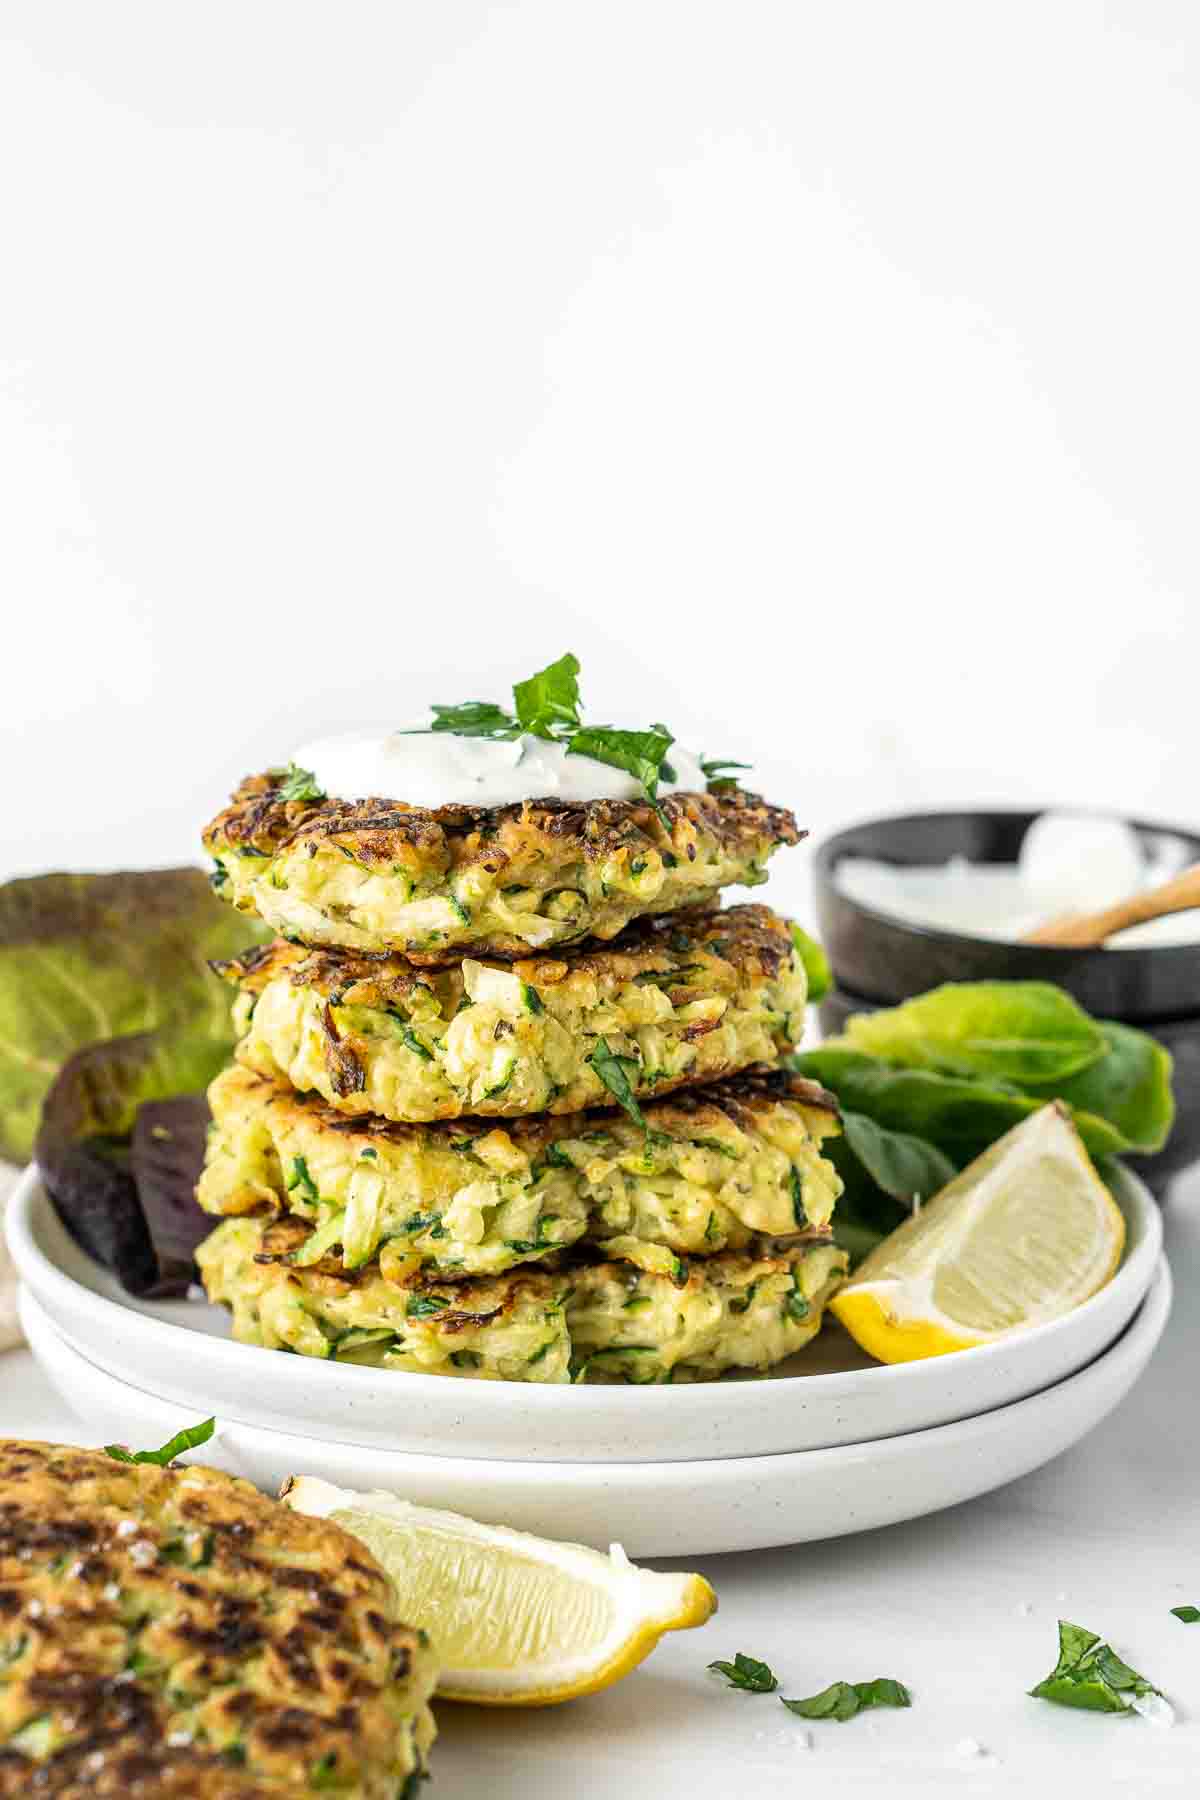 Stack of 4 zucchini fritters with sour cream on a plate with lemon.